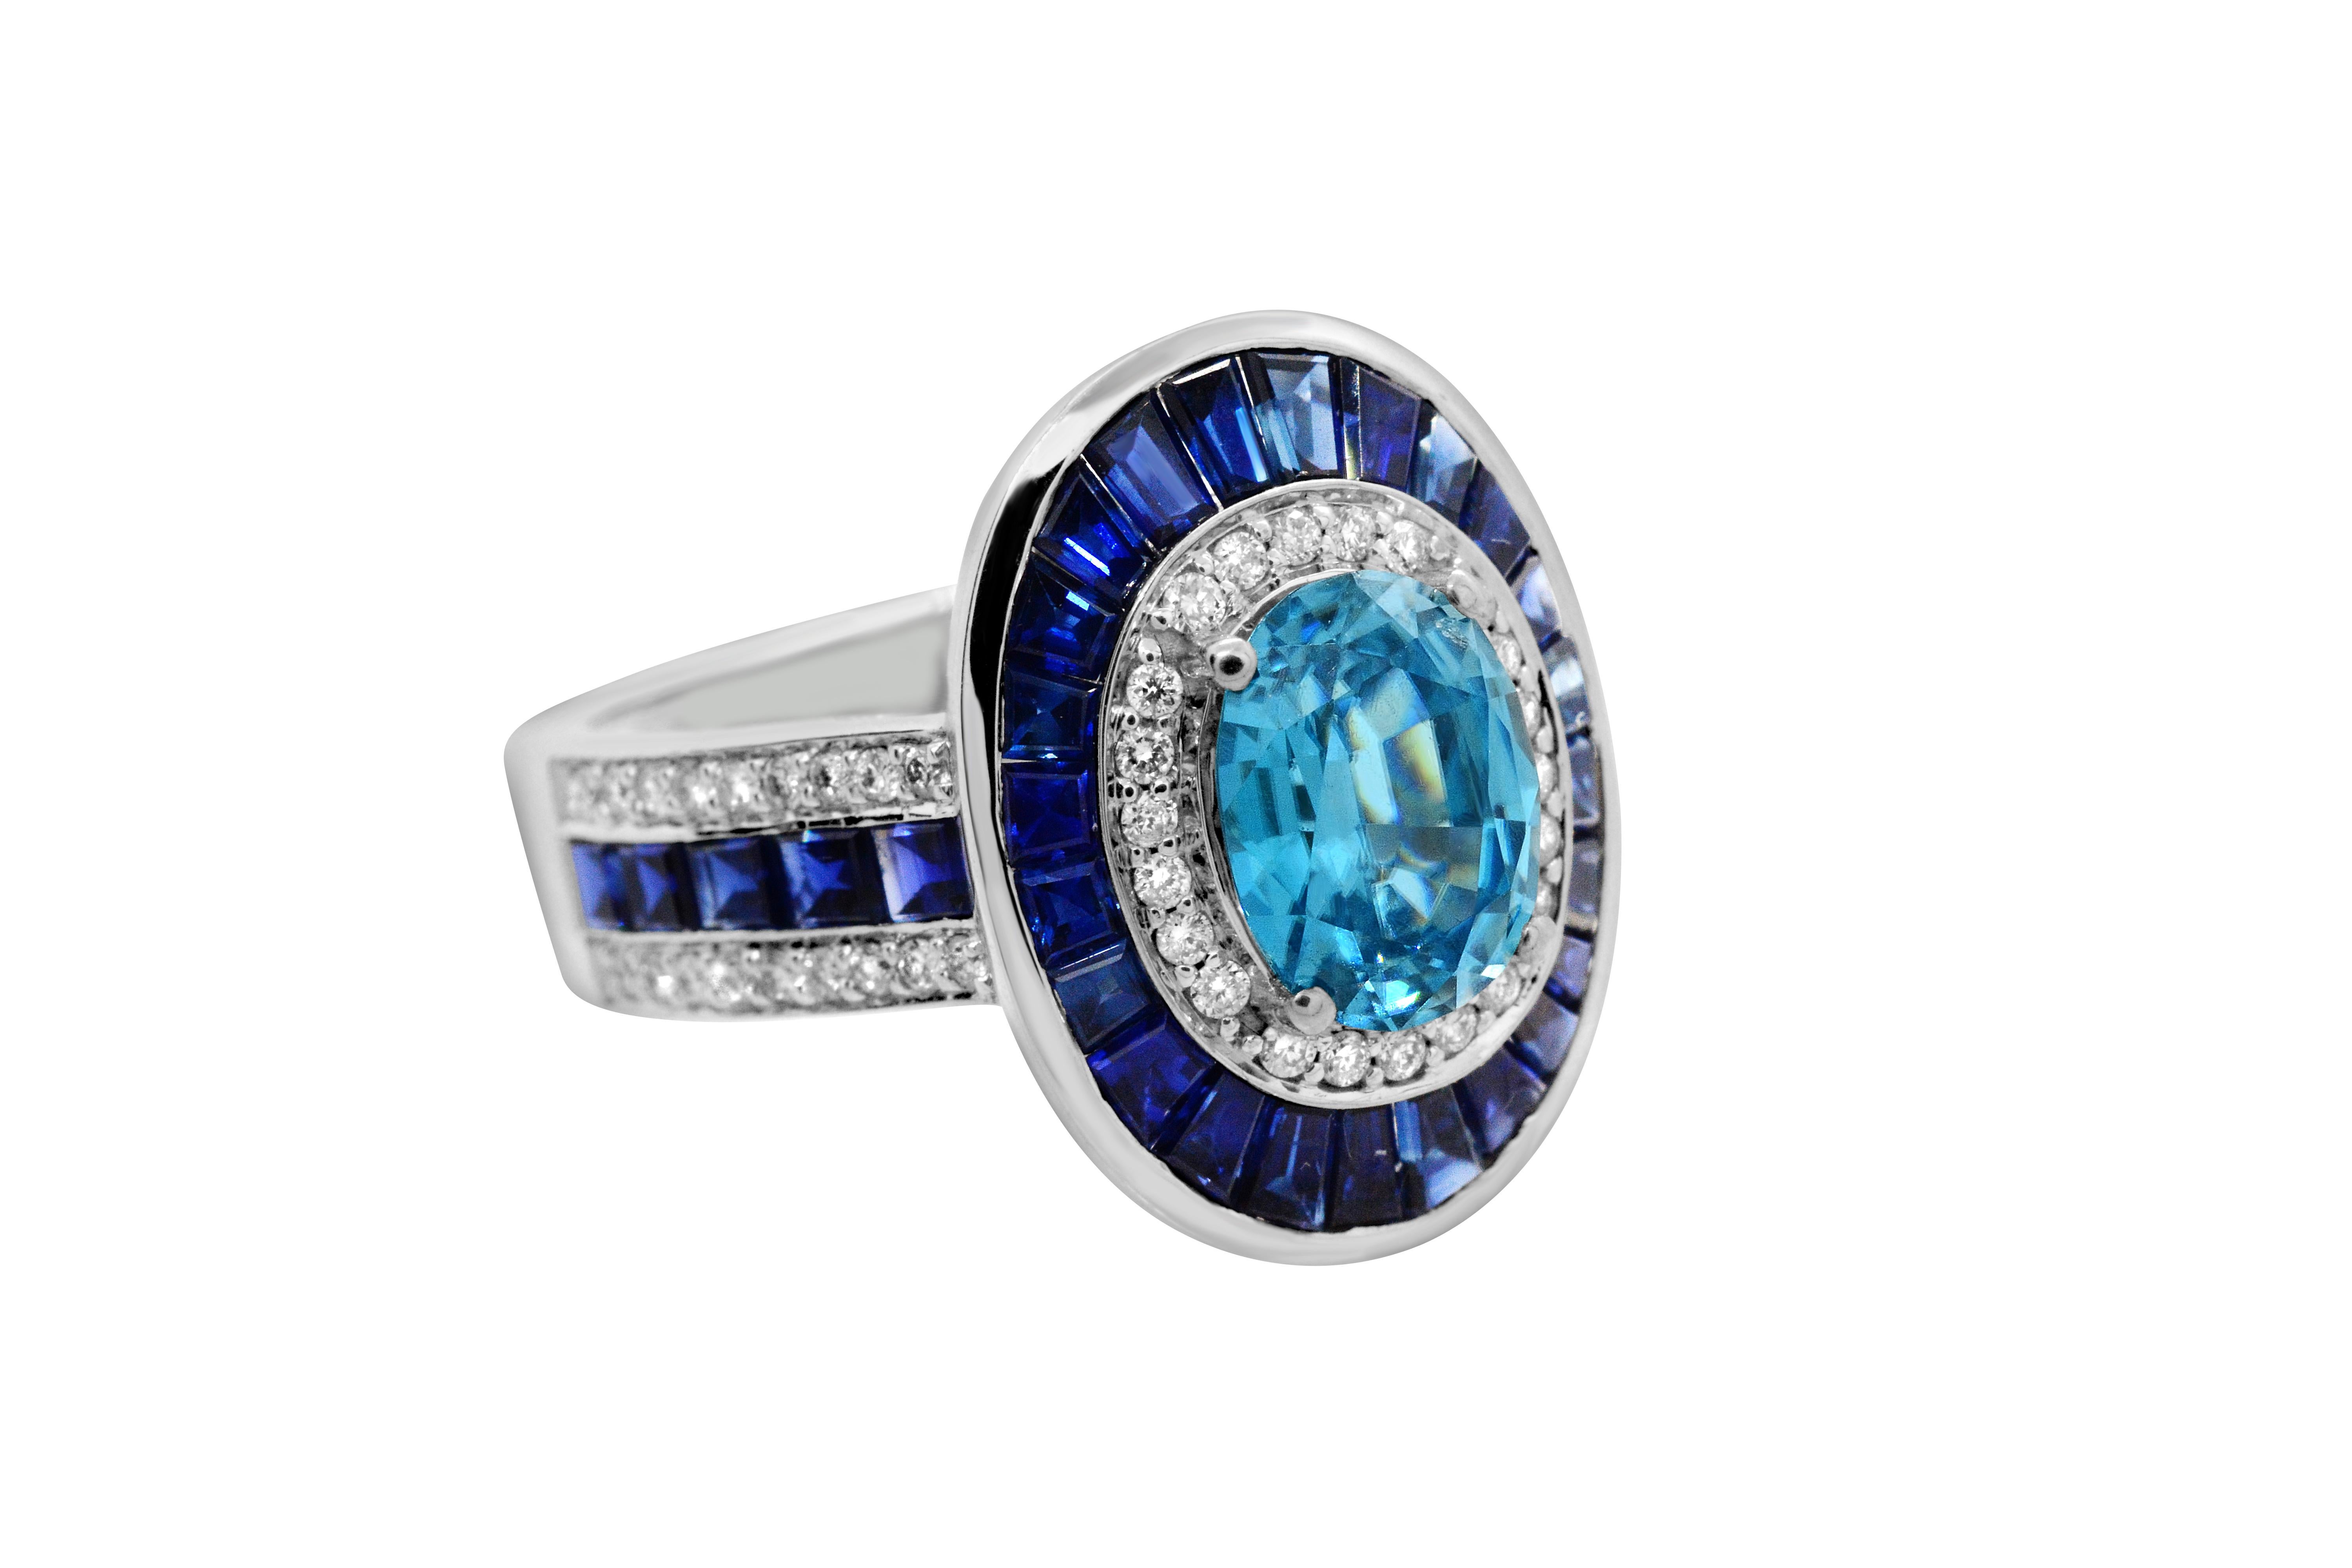 Strikingly bright Blue Zircon.  The first thing you will notice is the vivid and well-saturated 1.25 carat oval Blue Zircon.  It is perfectly encircled by 2.85 carats of tapered baguette Blue Sapphires and Diamonds that weight a total of 0.30 carat